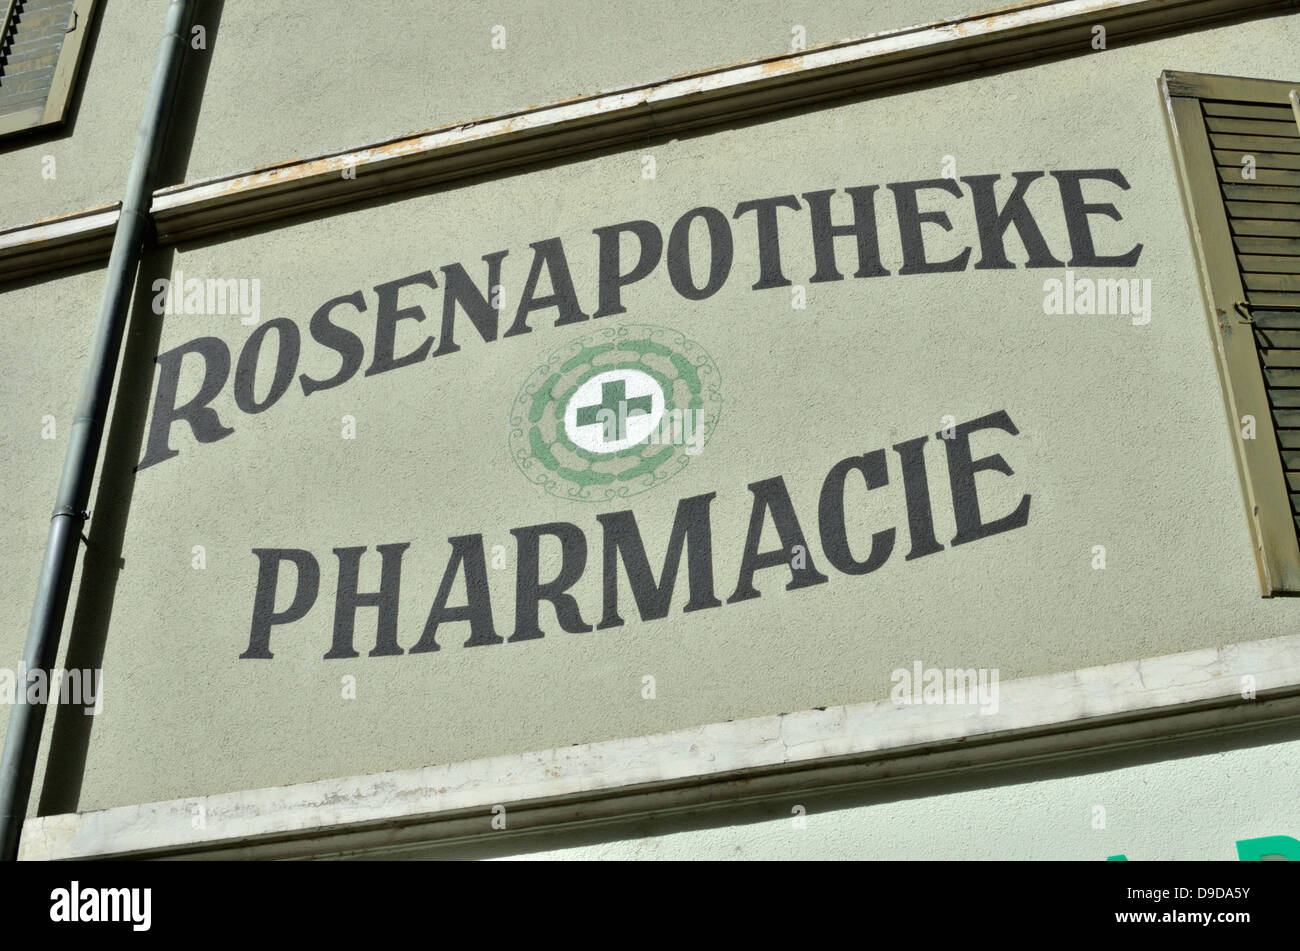 Apotheke High Resolution Stock Photography and Images - Alamy